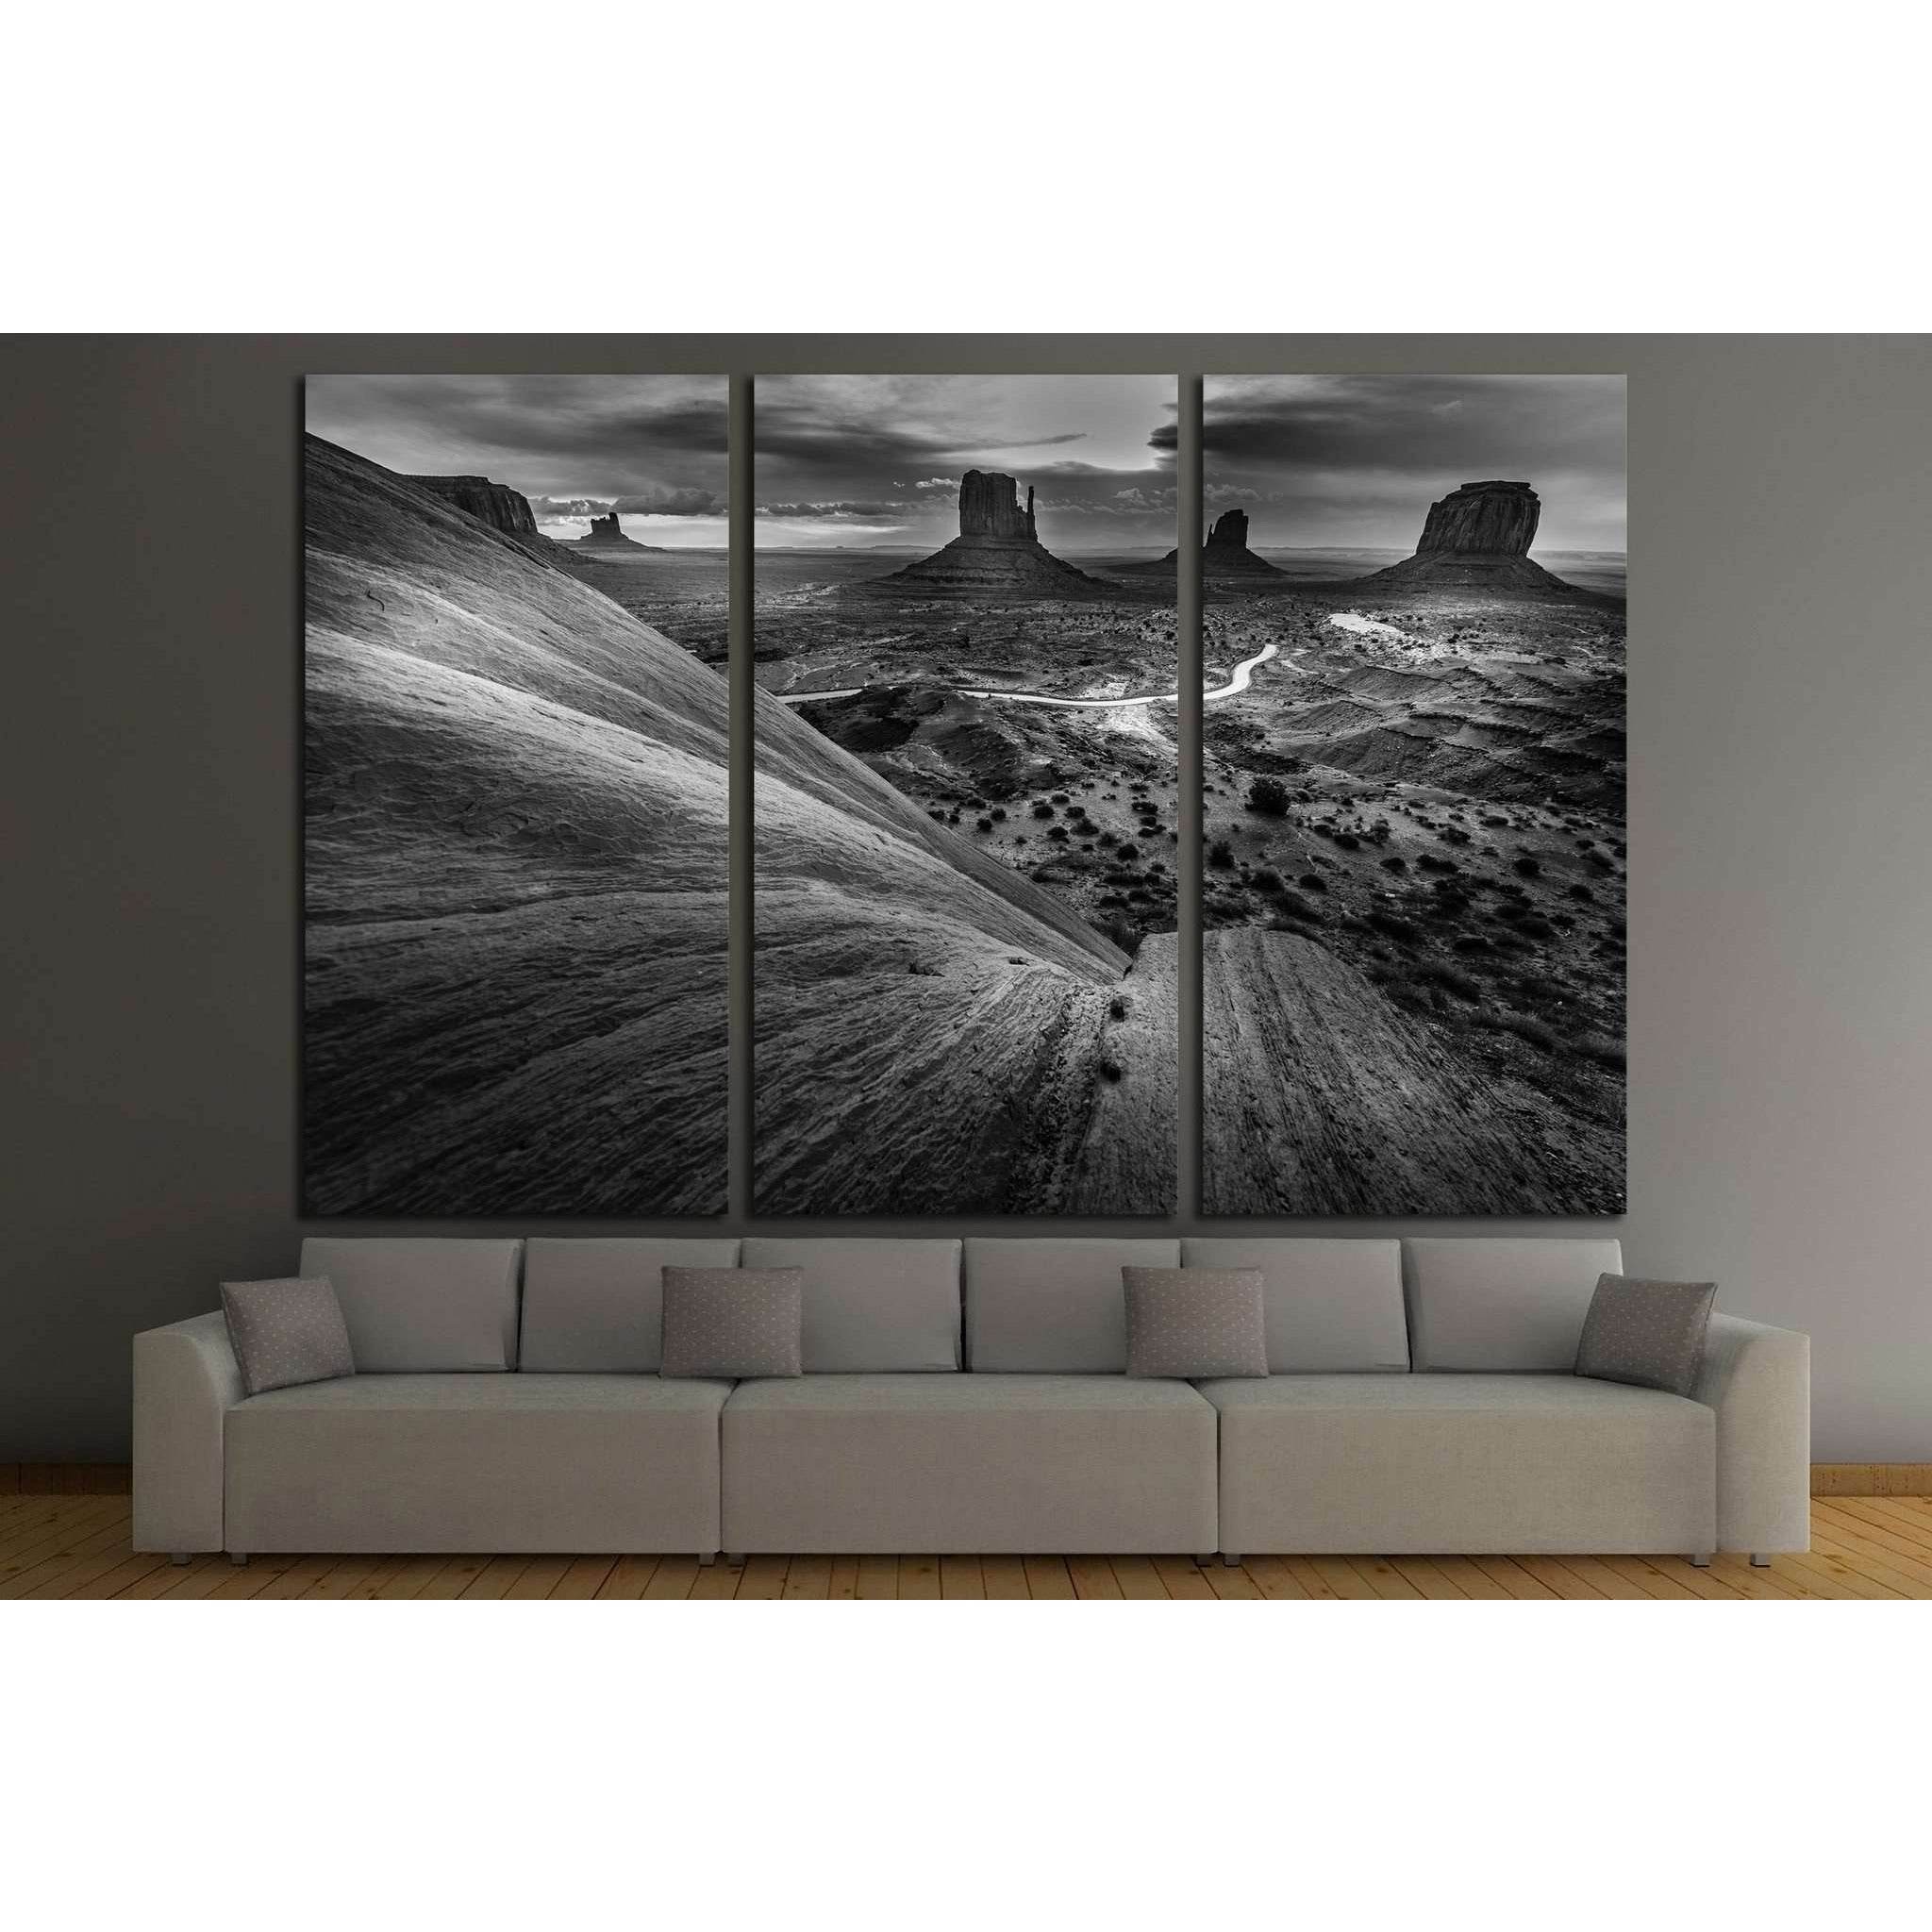 Monument Valley Black and White Famous American Landscapes №1992 Ready to Hang Canvas Print